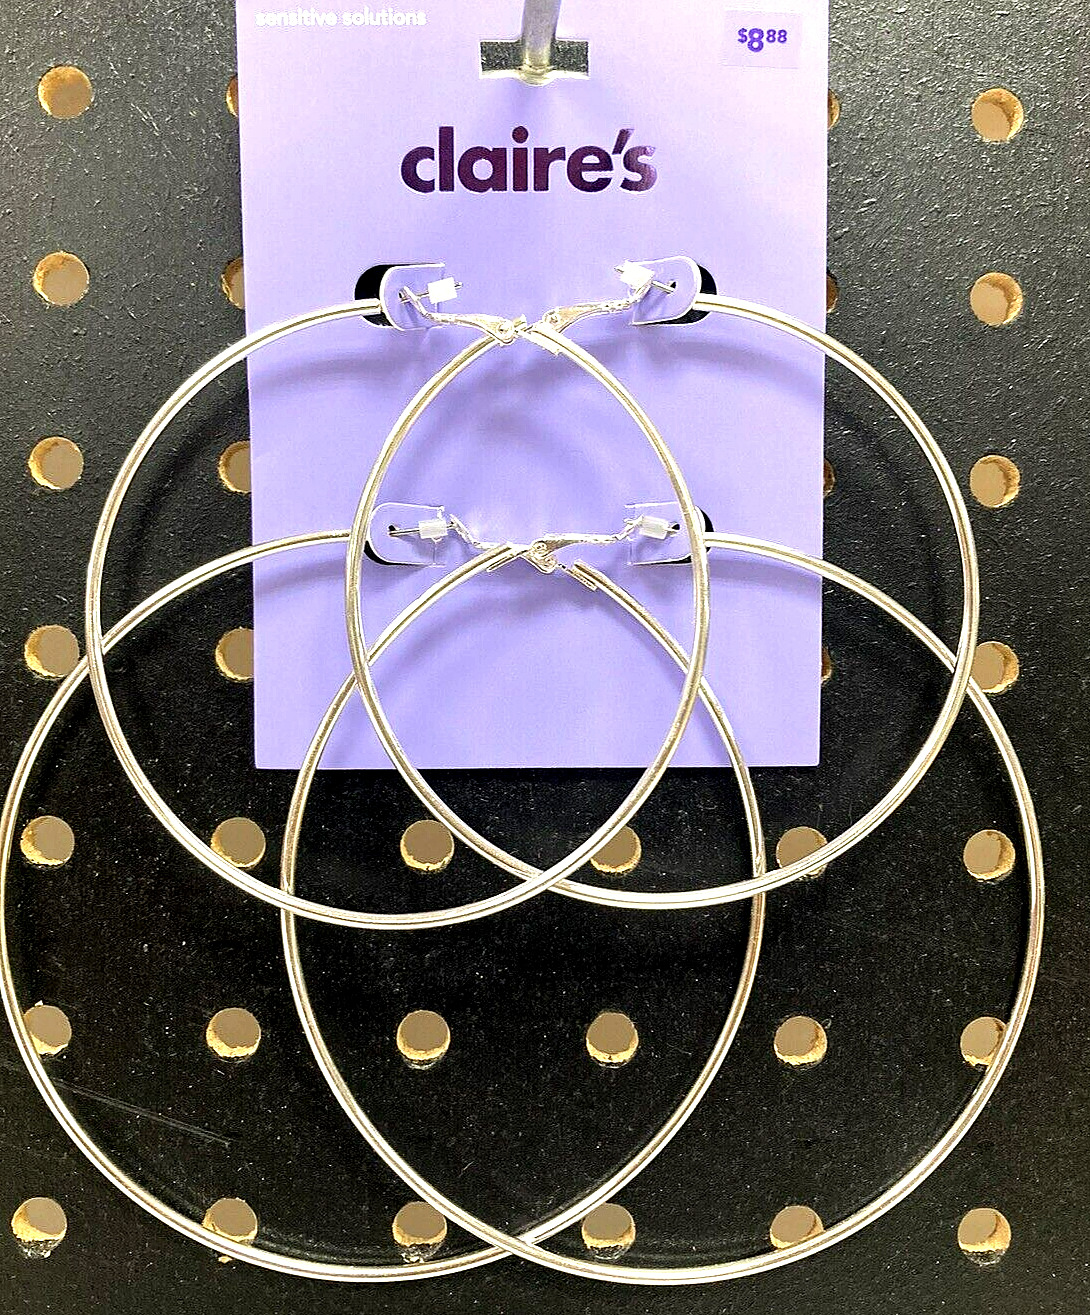 Claire’s Girls 2 Pairs Of Large Silver Hoop Earrings 73972-2